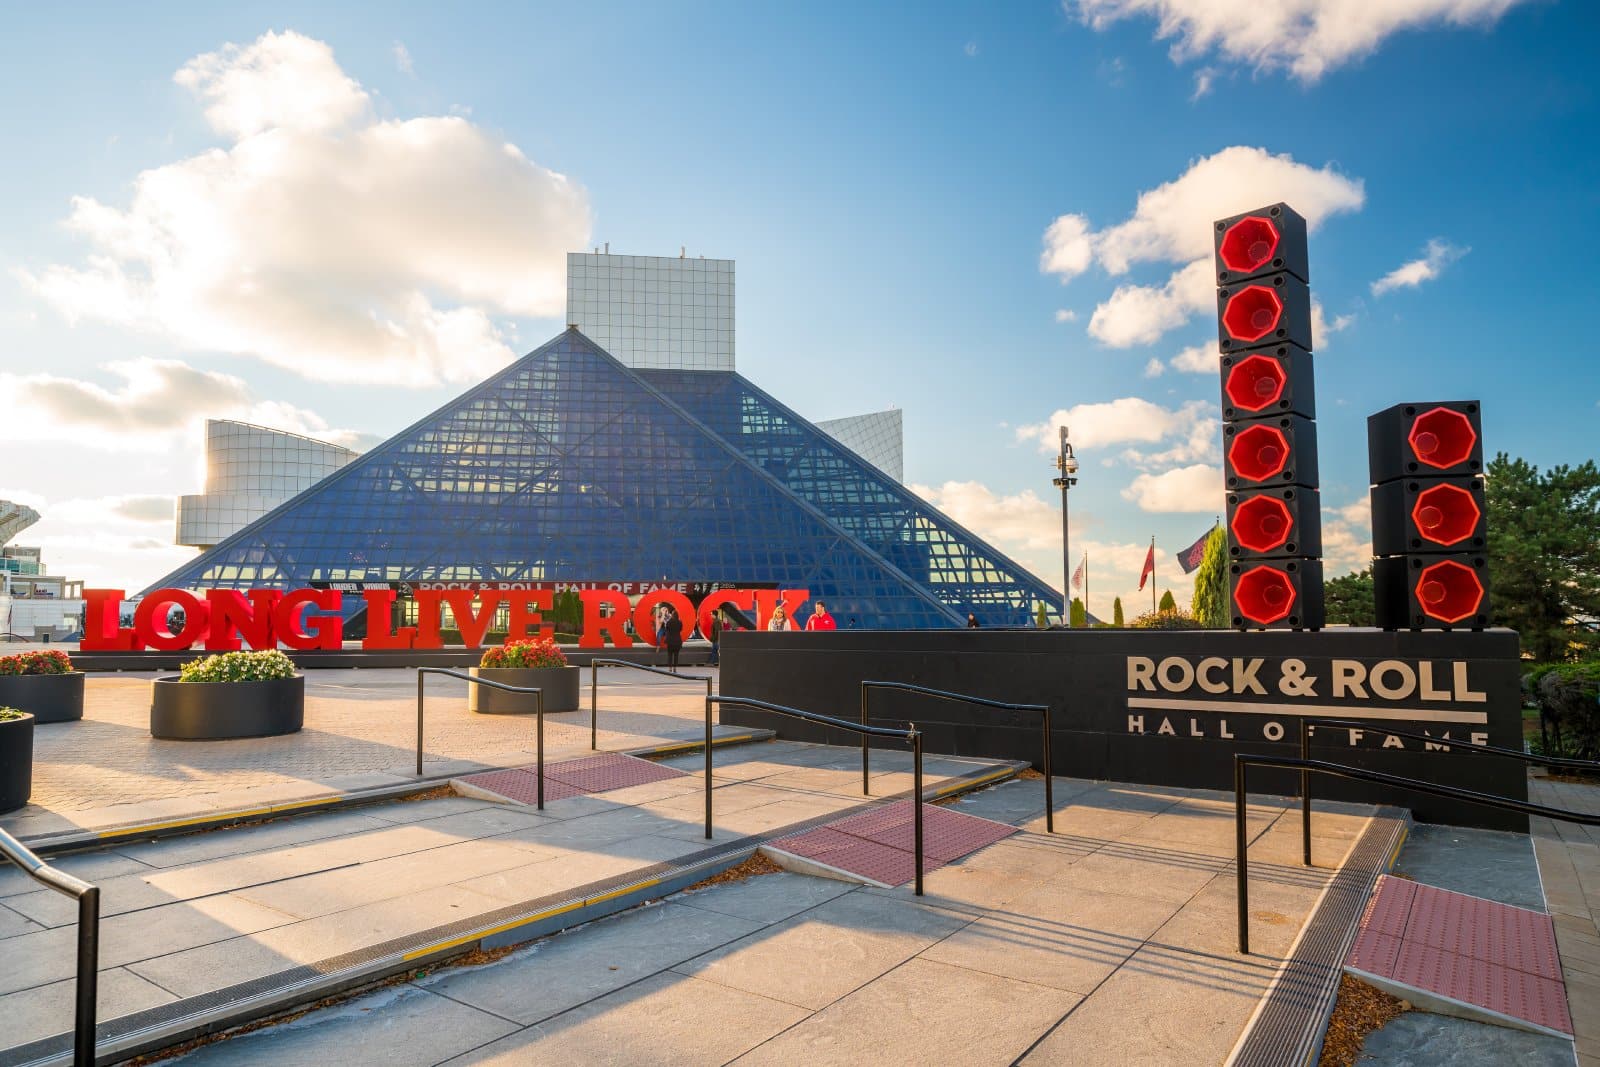 <p>Ohio sees tourism revenues of approximately $46 billion, boosted by attractions like the Rock and Roll Hall of Fame, which charges $30 for adult admission.</p>